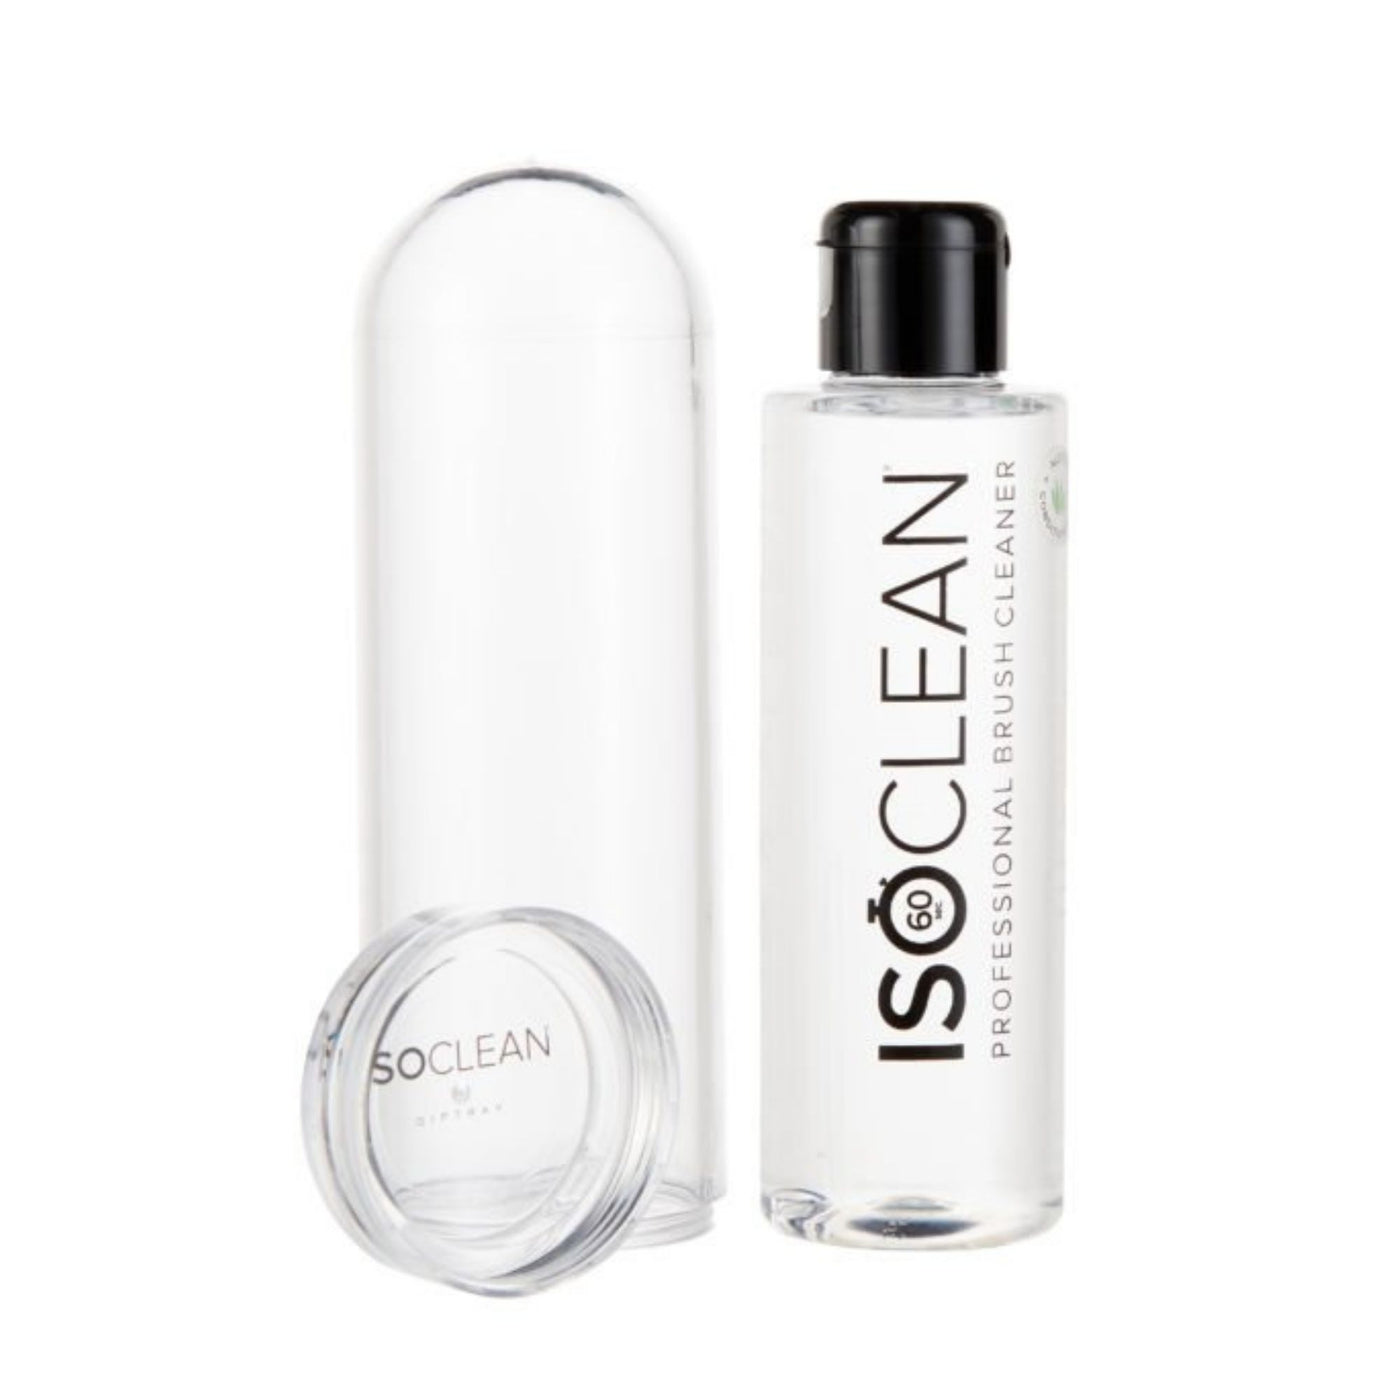 ISOCLEAN - Makeup Brush Cleaner with Dip Tray - 165ml